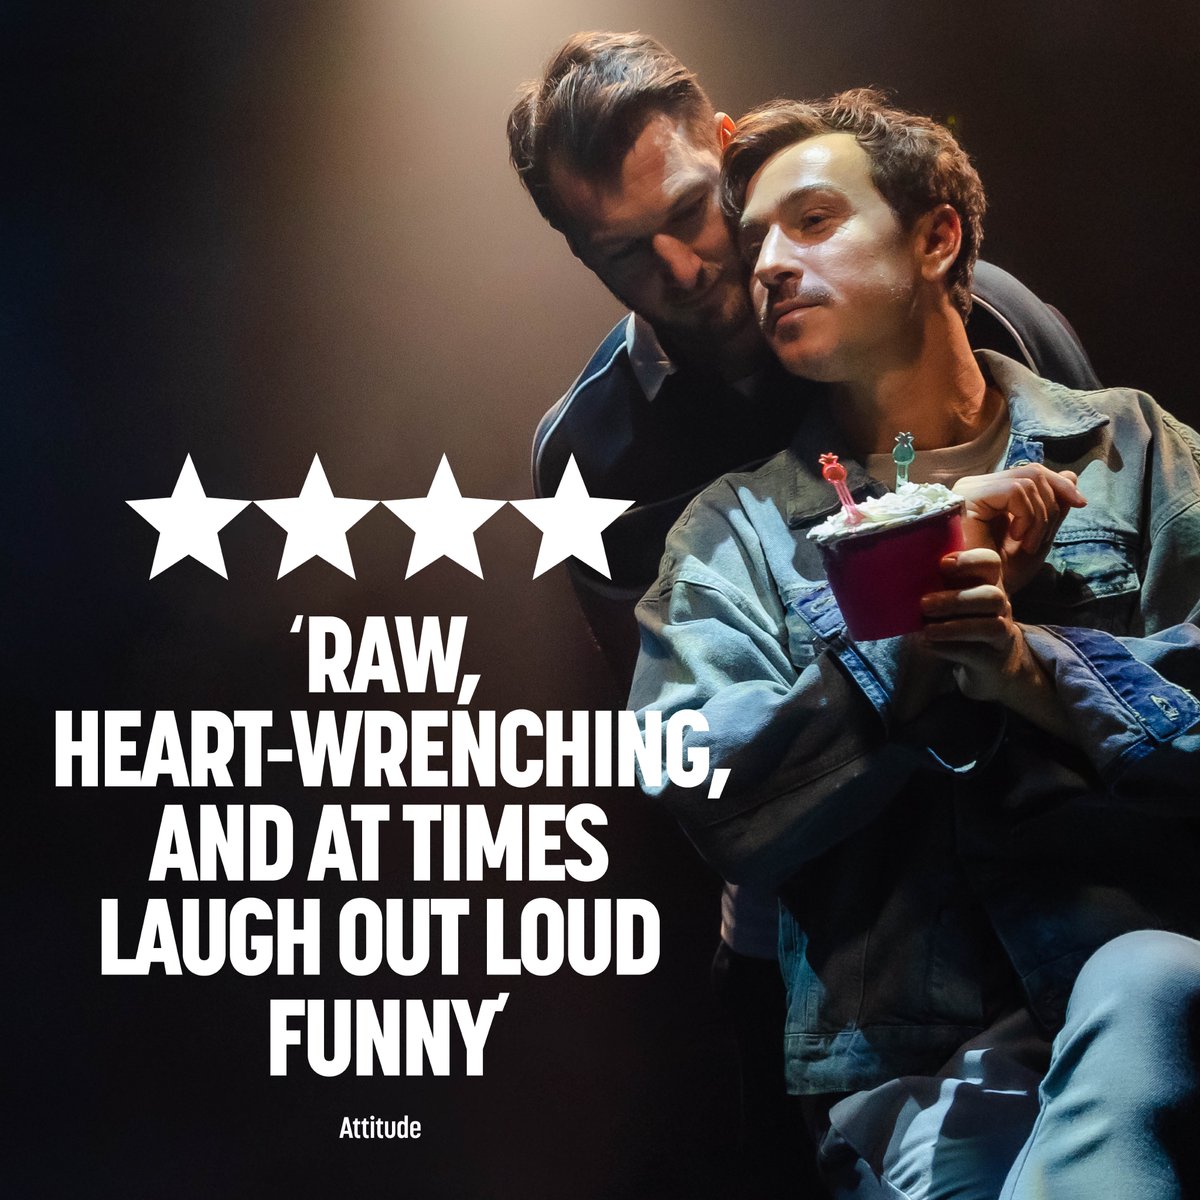 Run, don't walk, to see Nick Hayes and Matthew Stathers star in this 'raw, heartwrenching, and at times laugh out loud funny' (★★★★ @AttitudeMag) two-hander, written by Michael Batten, @7DialsPlayhouse until 1st June 🏃‍♂️💨🎟bit.ly/3UIiLKW